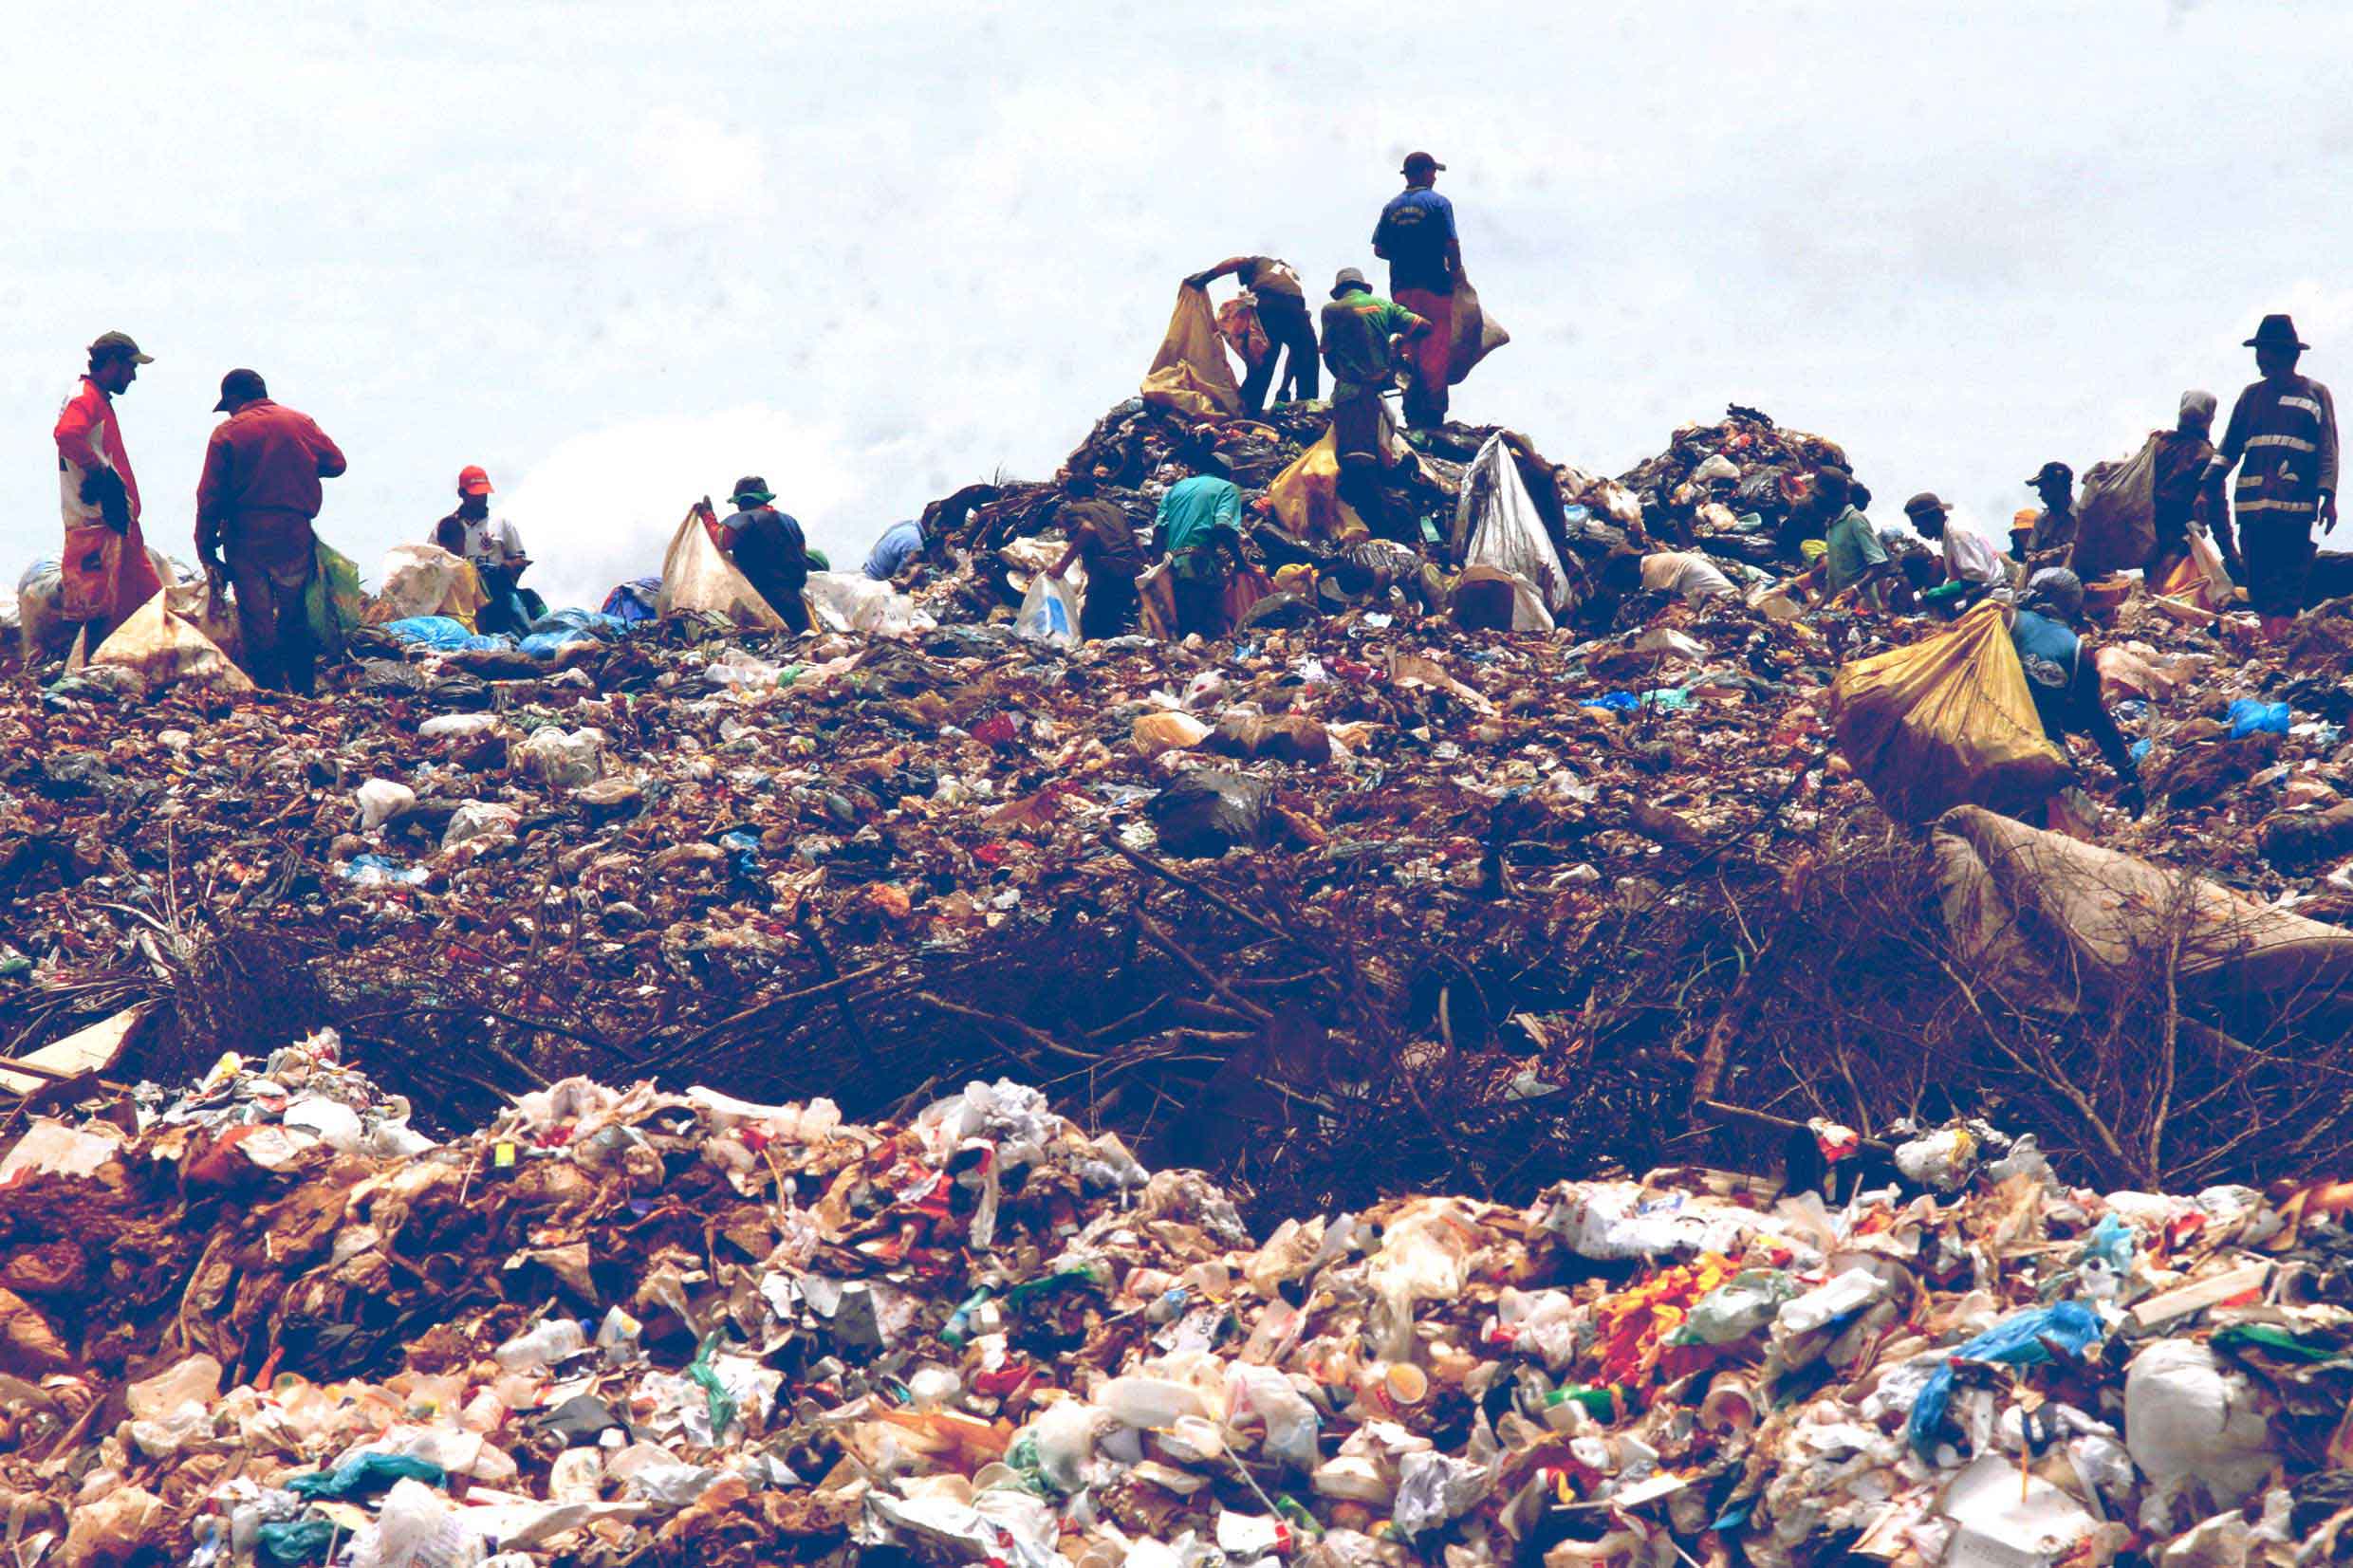 People standing on top of a trash pile picking up the trash and putting it in bags